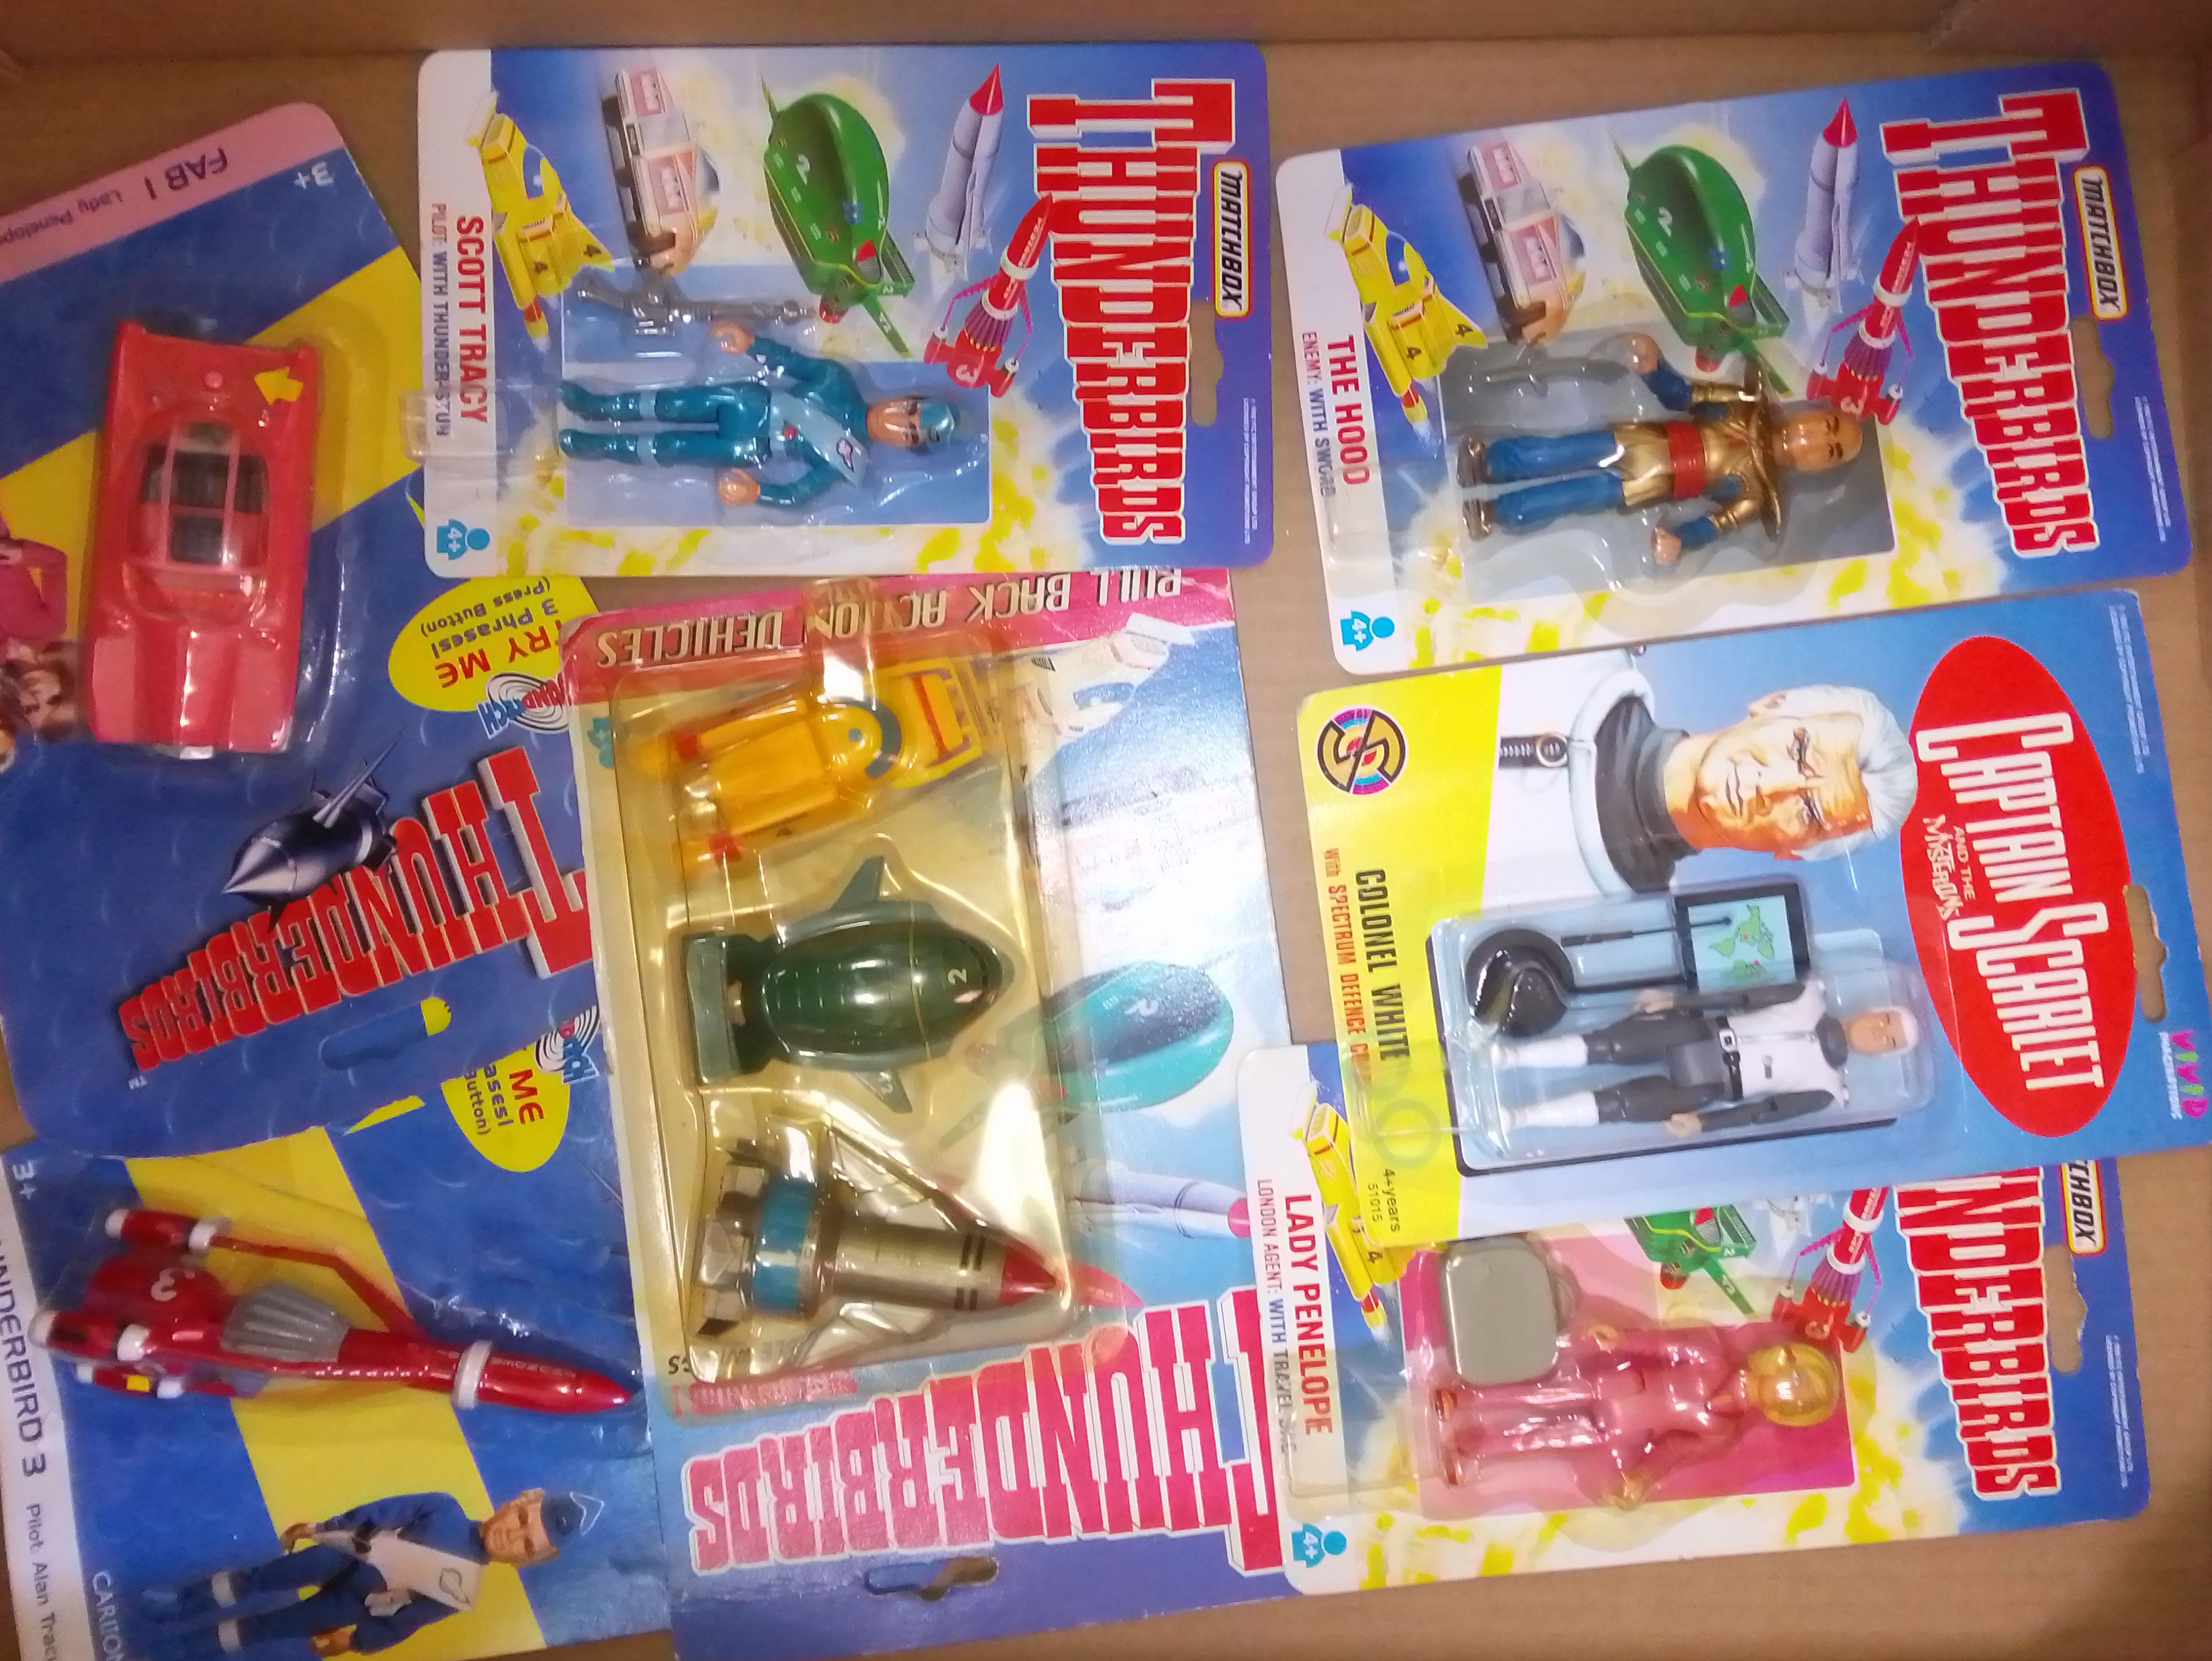 A box of unopened Thunderbird toys on card.